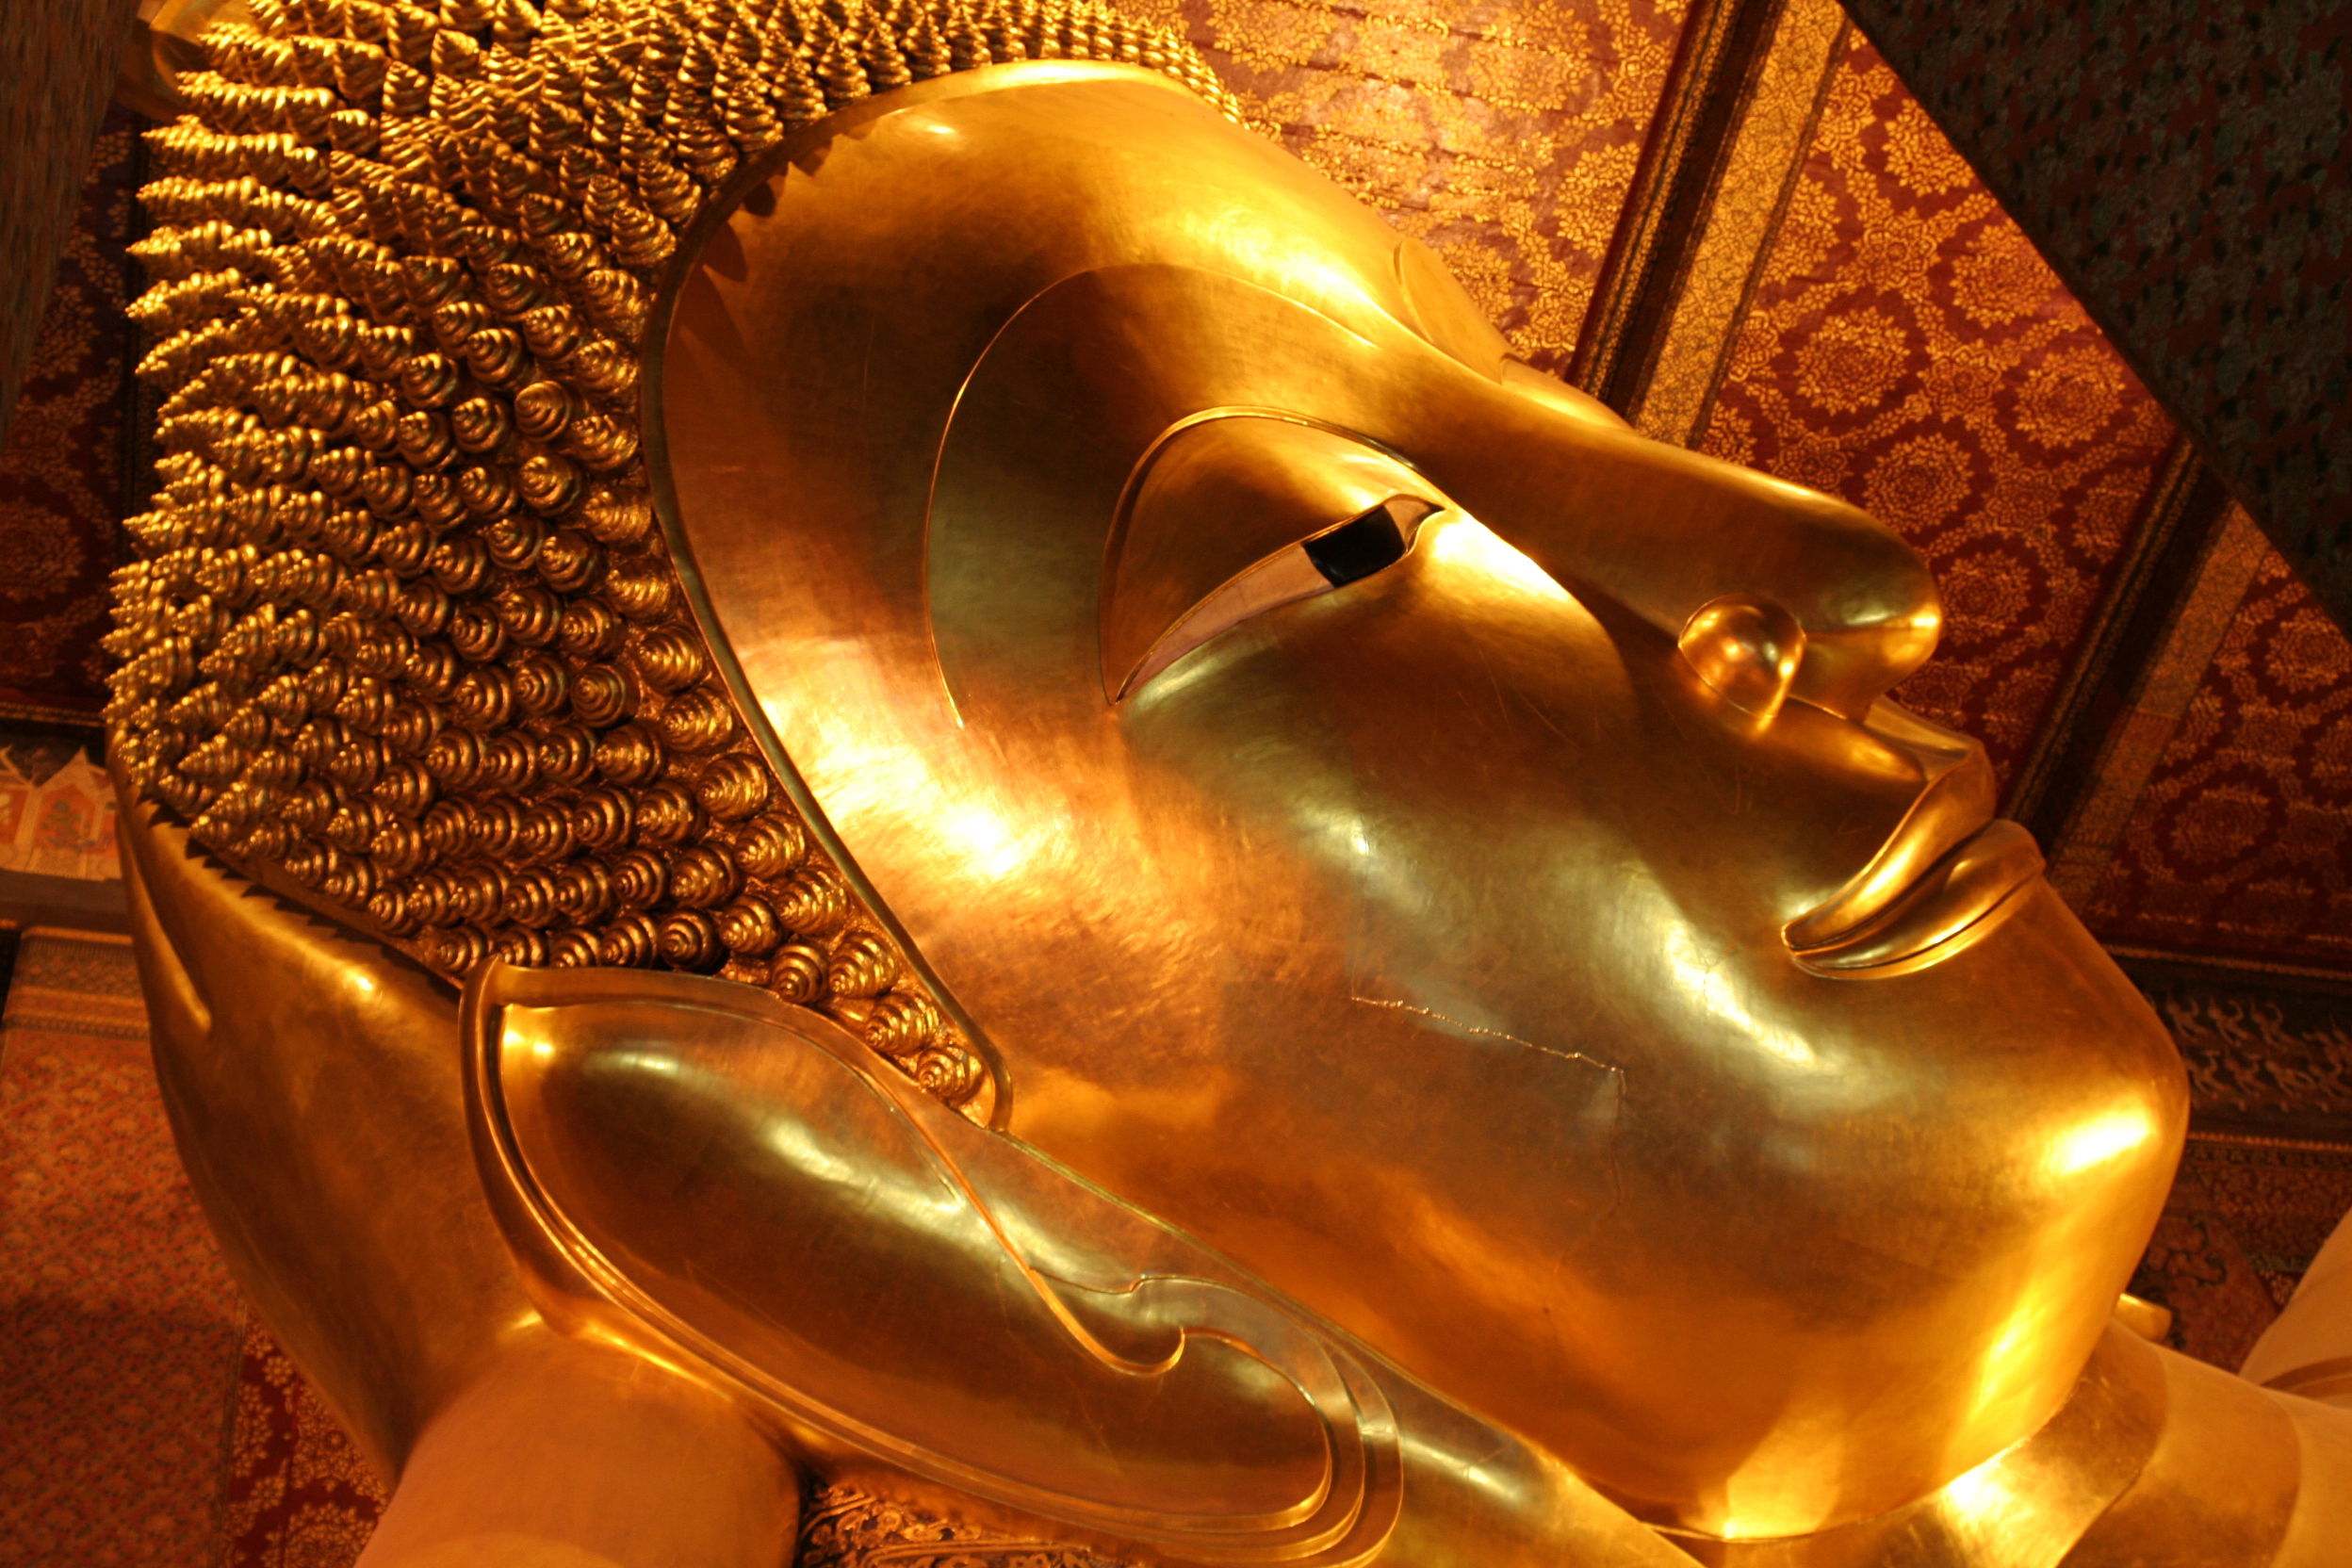 The smiling face of the massive Reclining Buddha in Bangkok in gold leaf